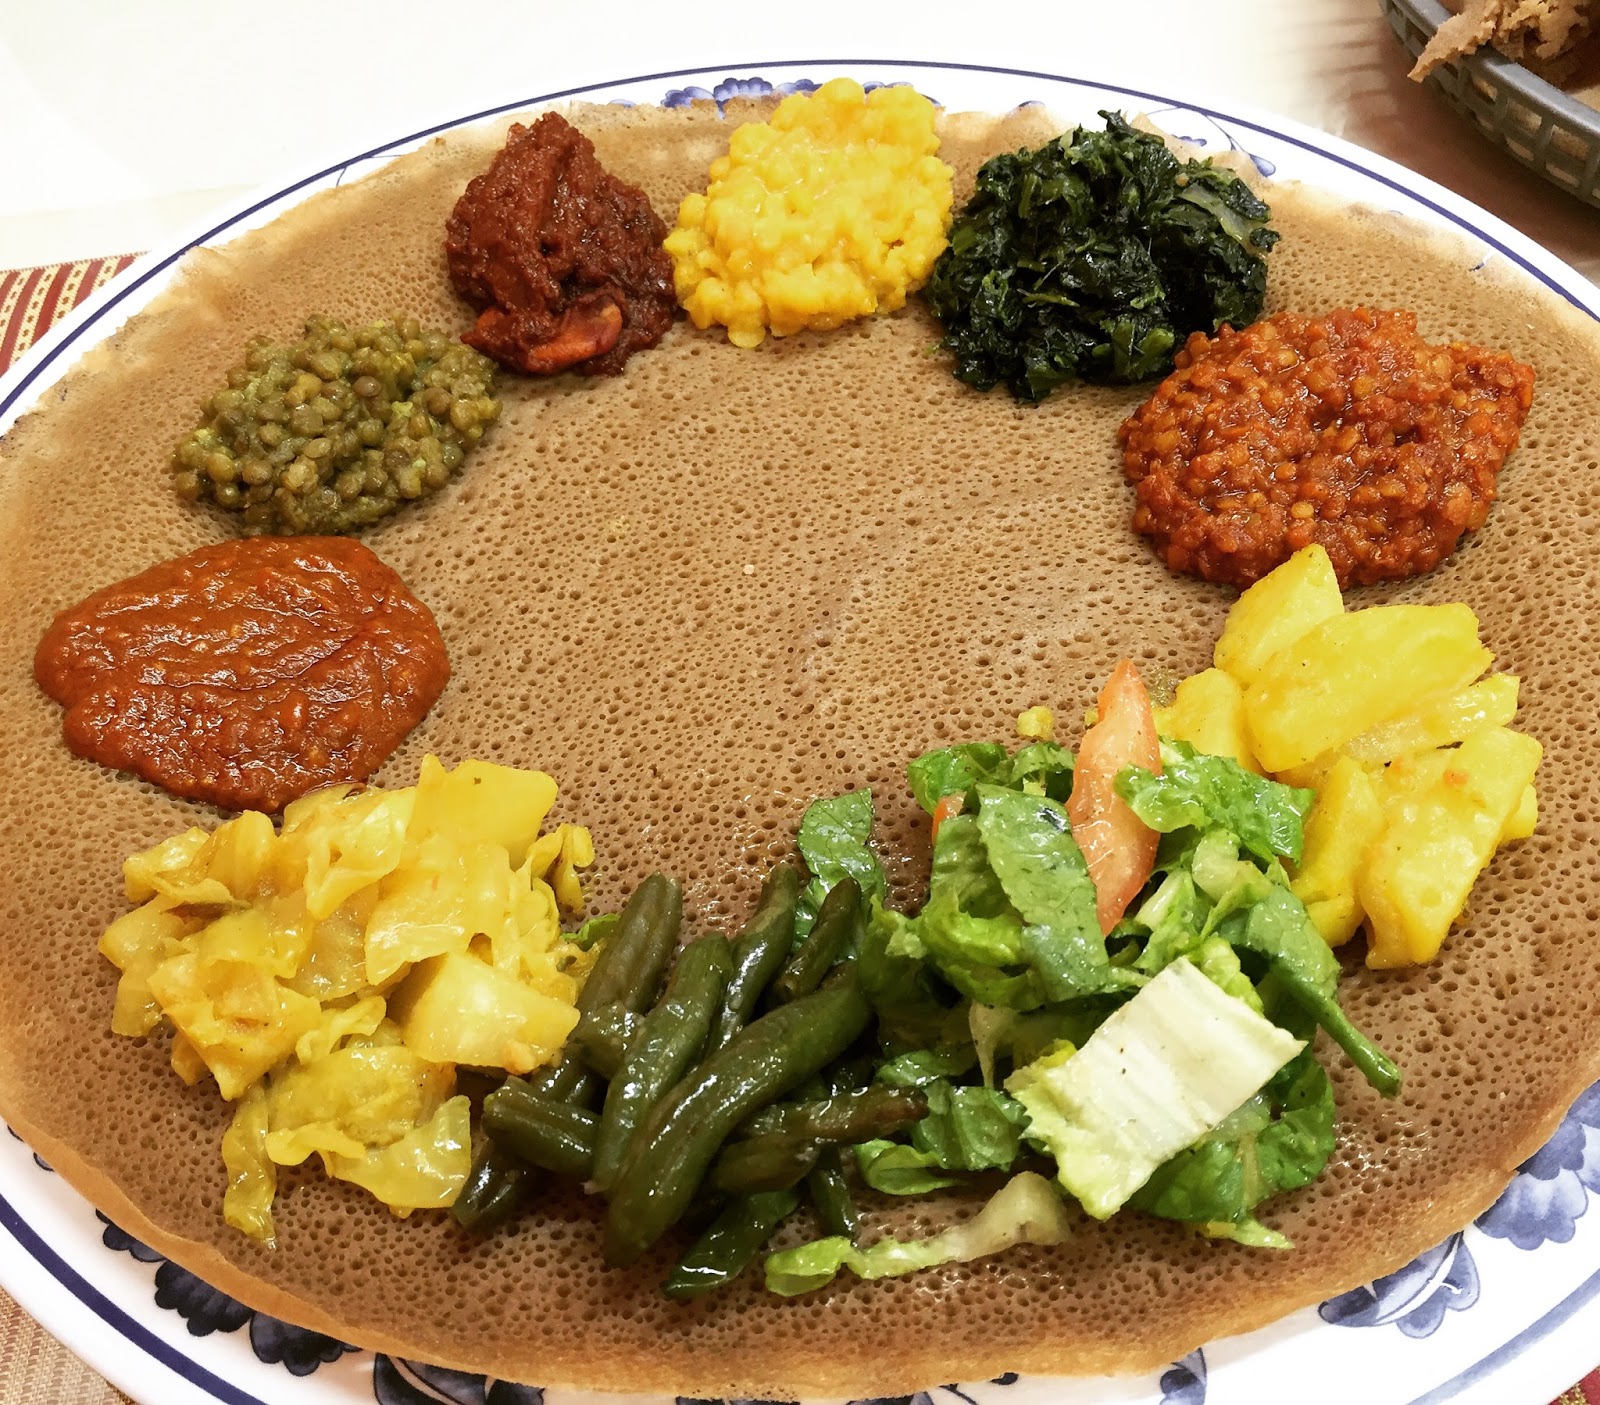 Trying Ethiopian food for the first time - Tana Ethiopian ...